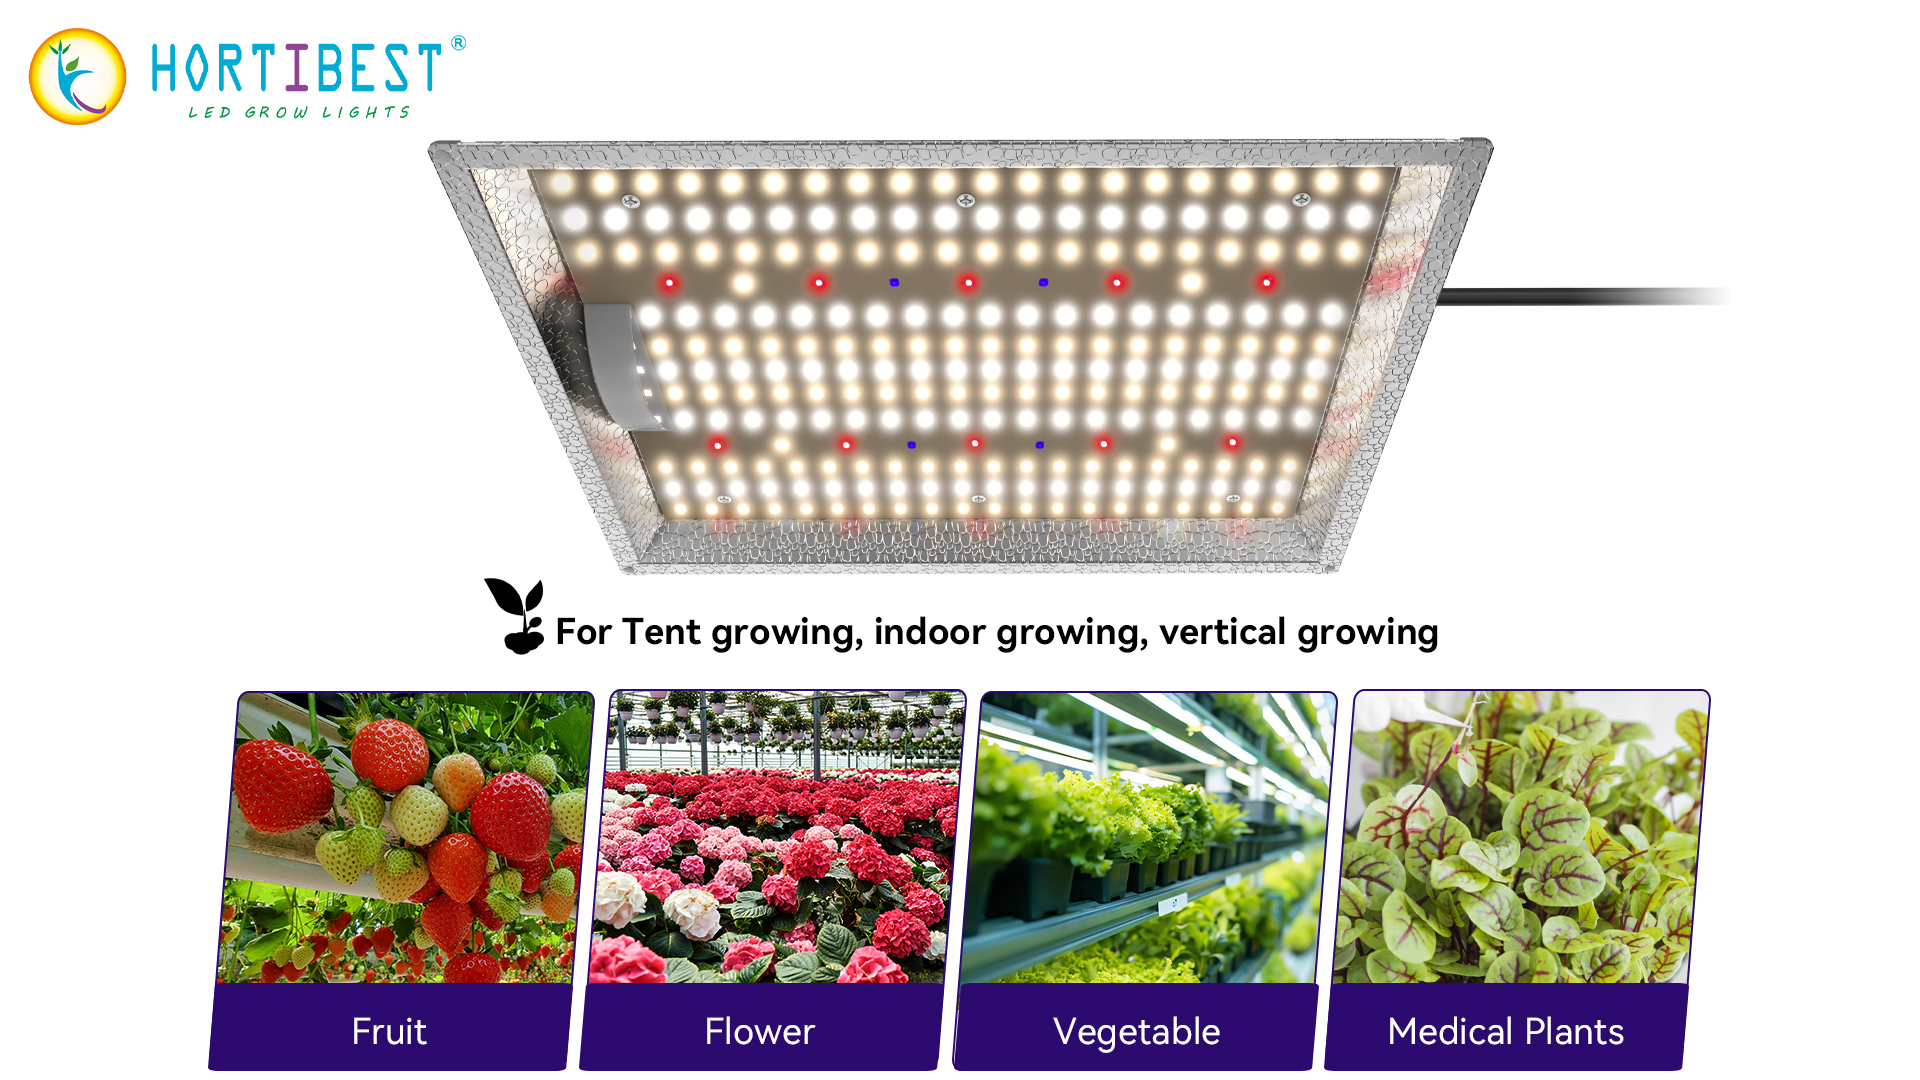 QB Series led grow lights: Best Choice for Beginner Tent Planting